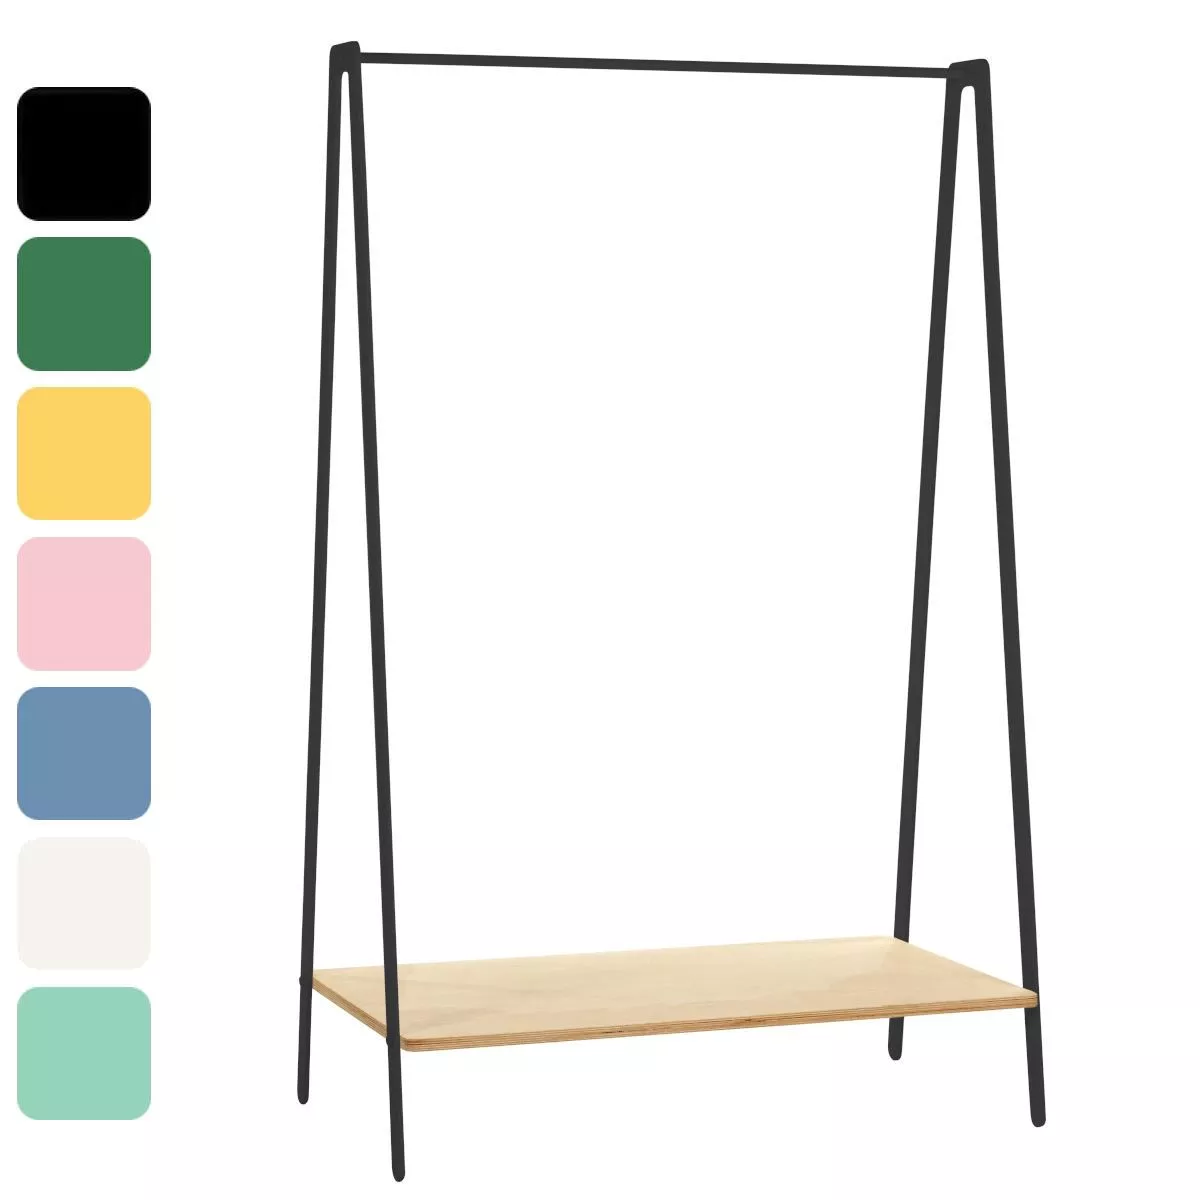 Design Clothes Rack made of Steel and Wood in Various Colors